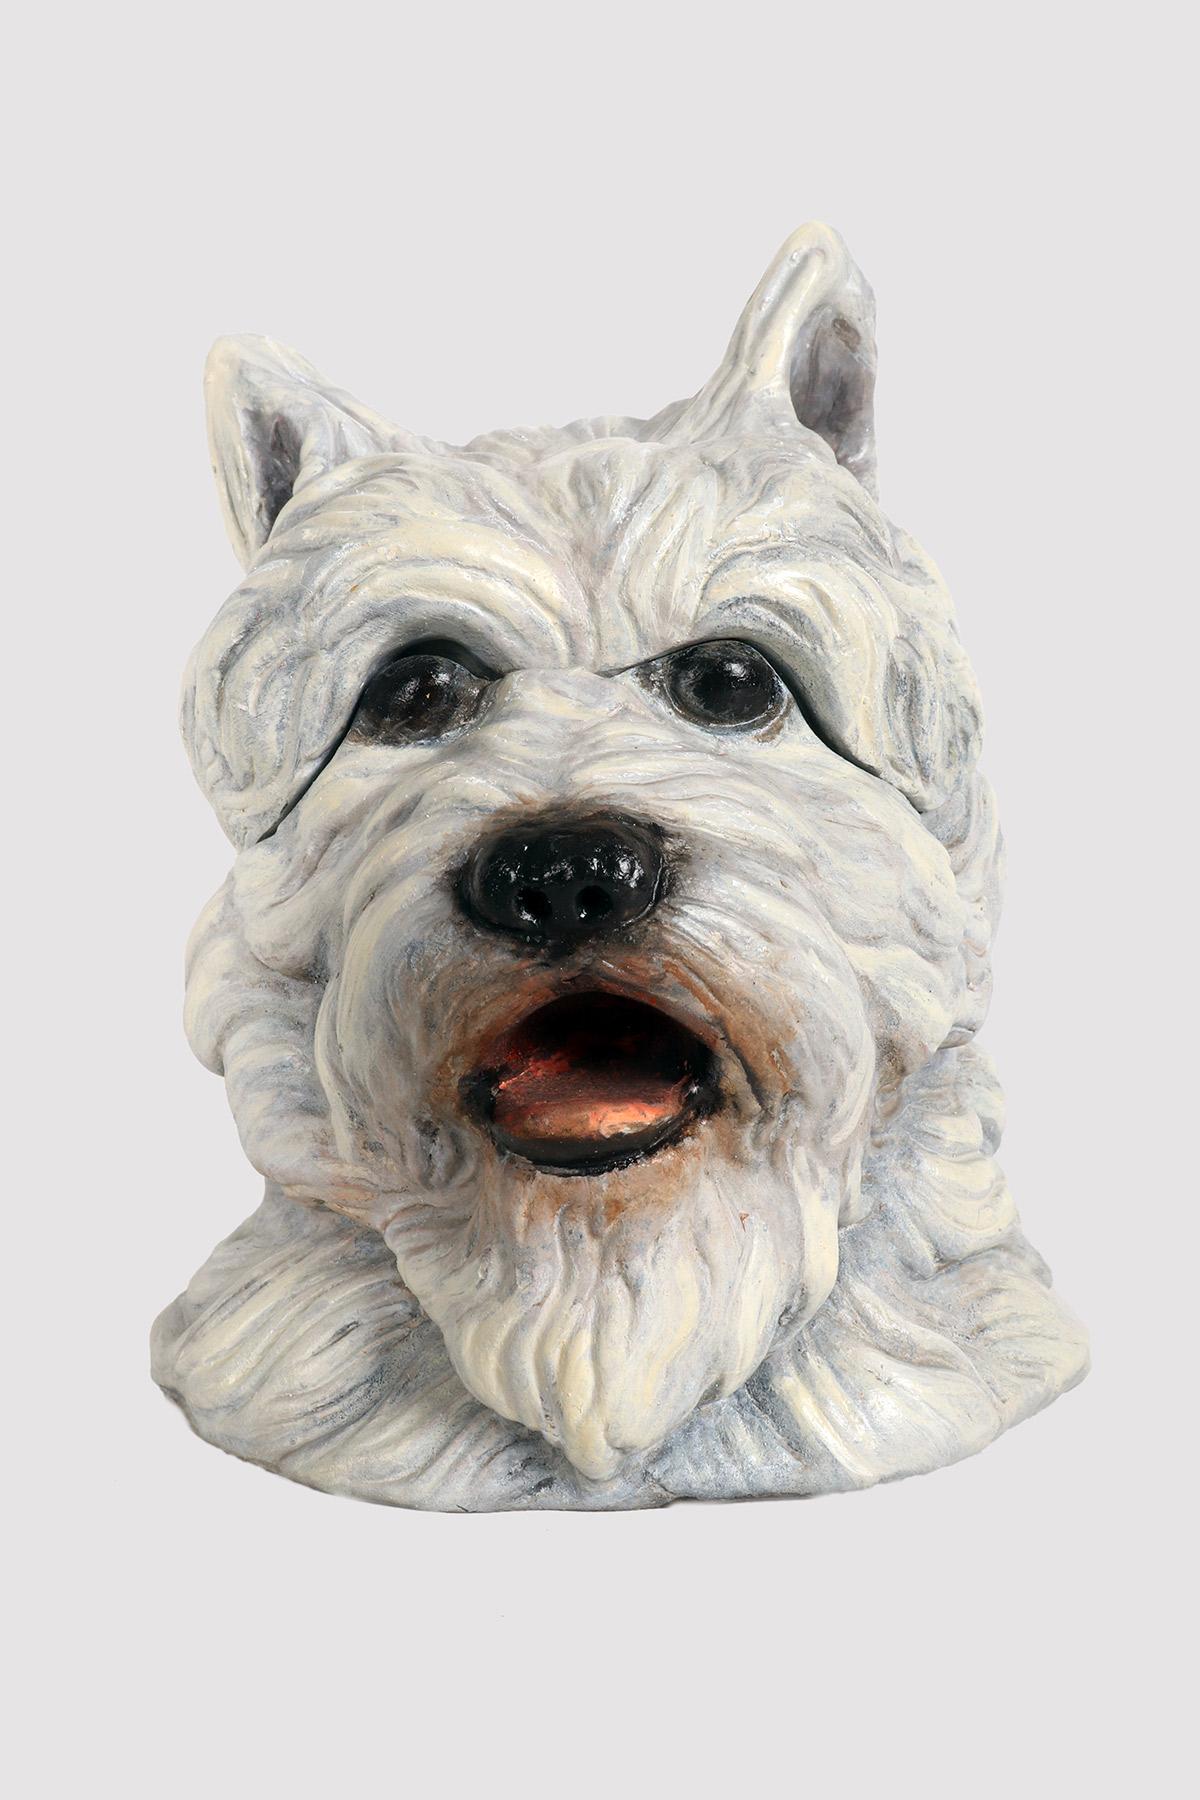 An unusual tobacco container made of painted terracotta and depicting the West Highland terrier dog’s head. The top opens revealing the container. Austria late 1800s - early 1900s.